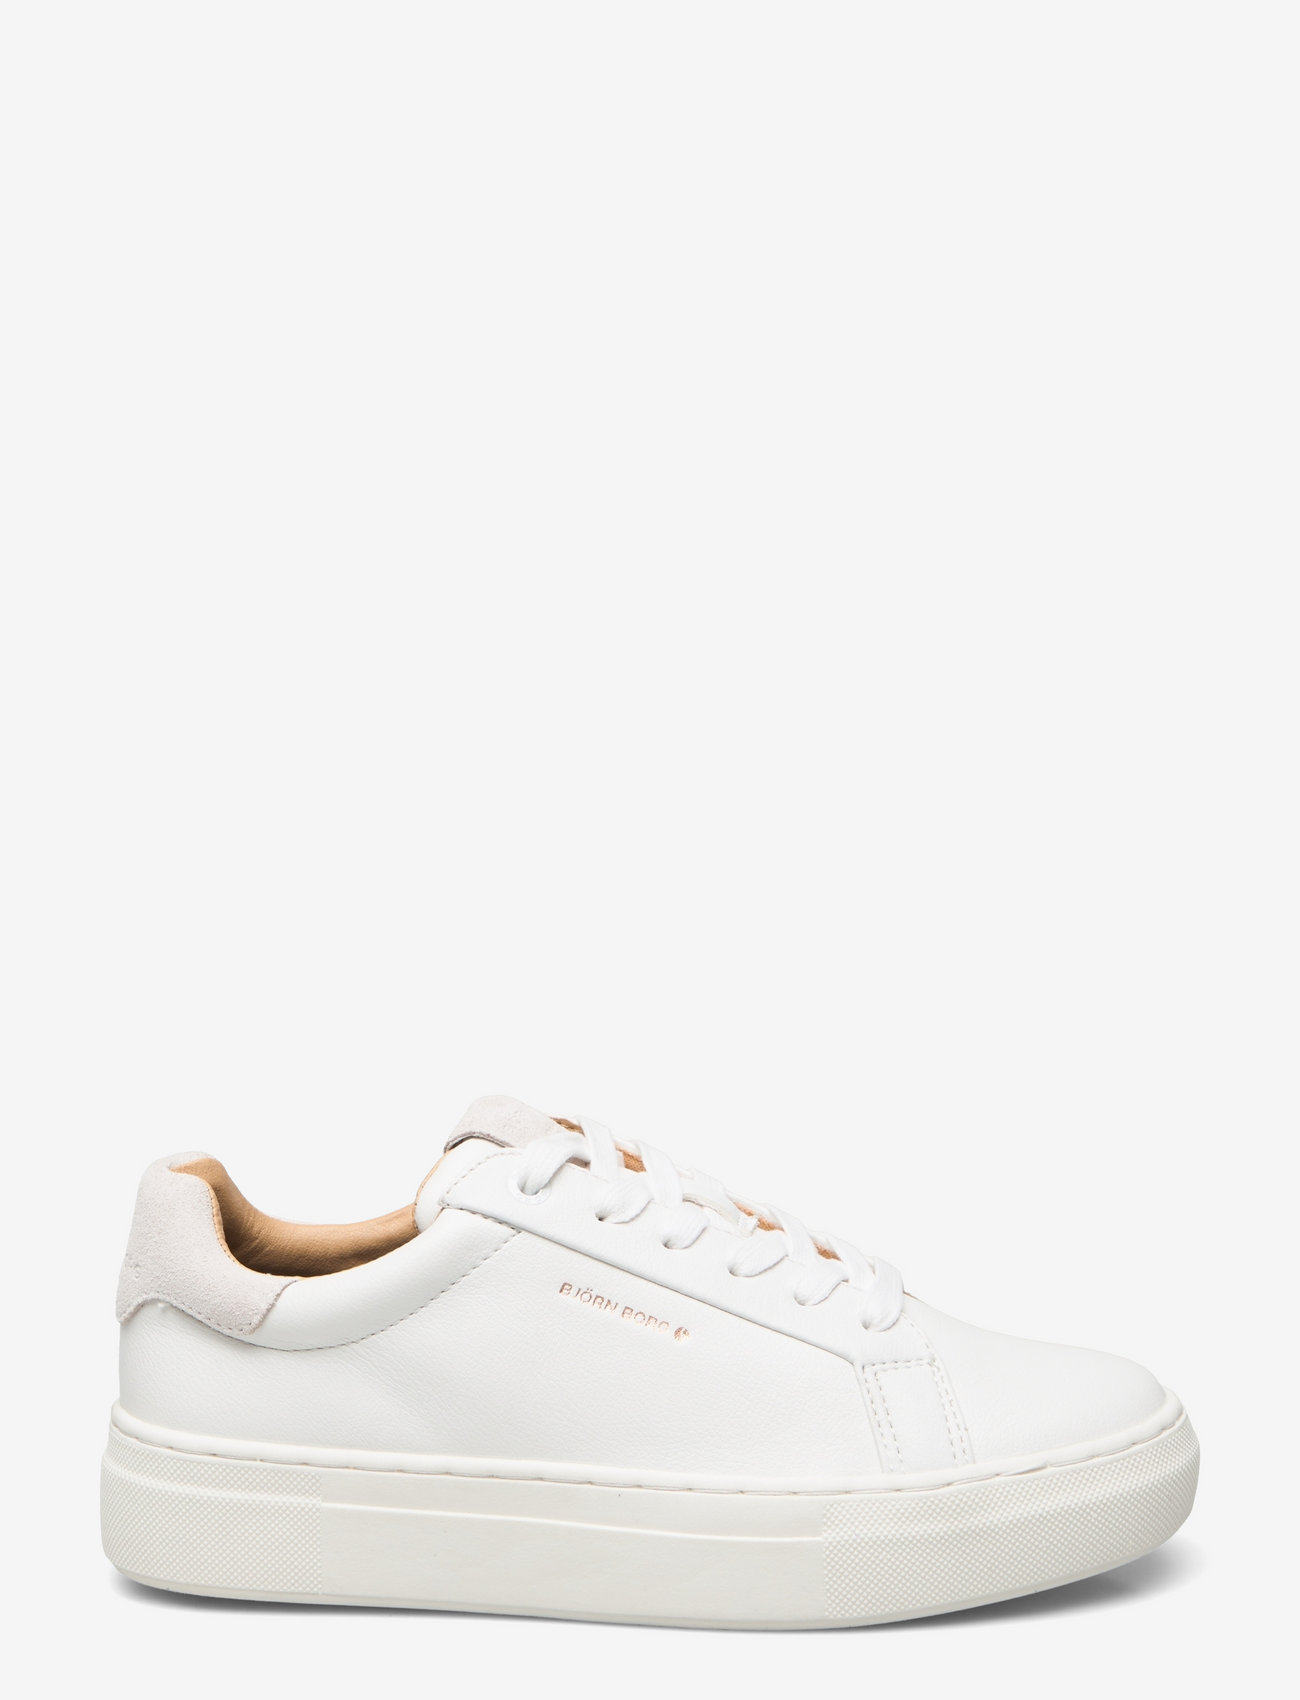 Björn Borg - T1620 CLS W - sneakers - wht - 1